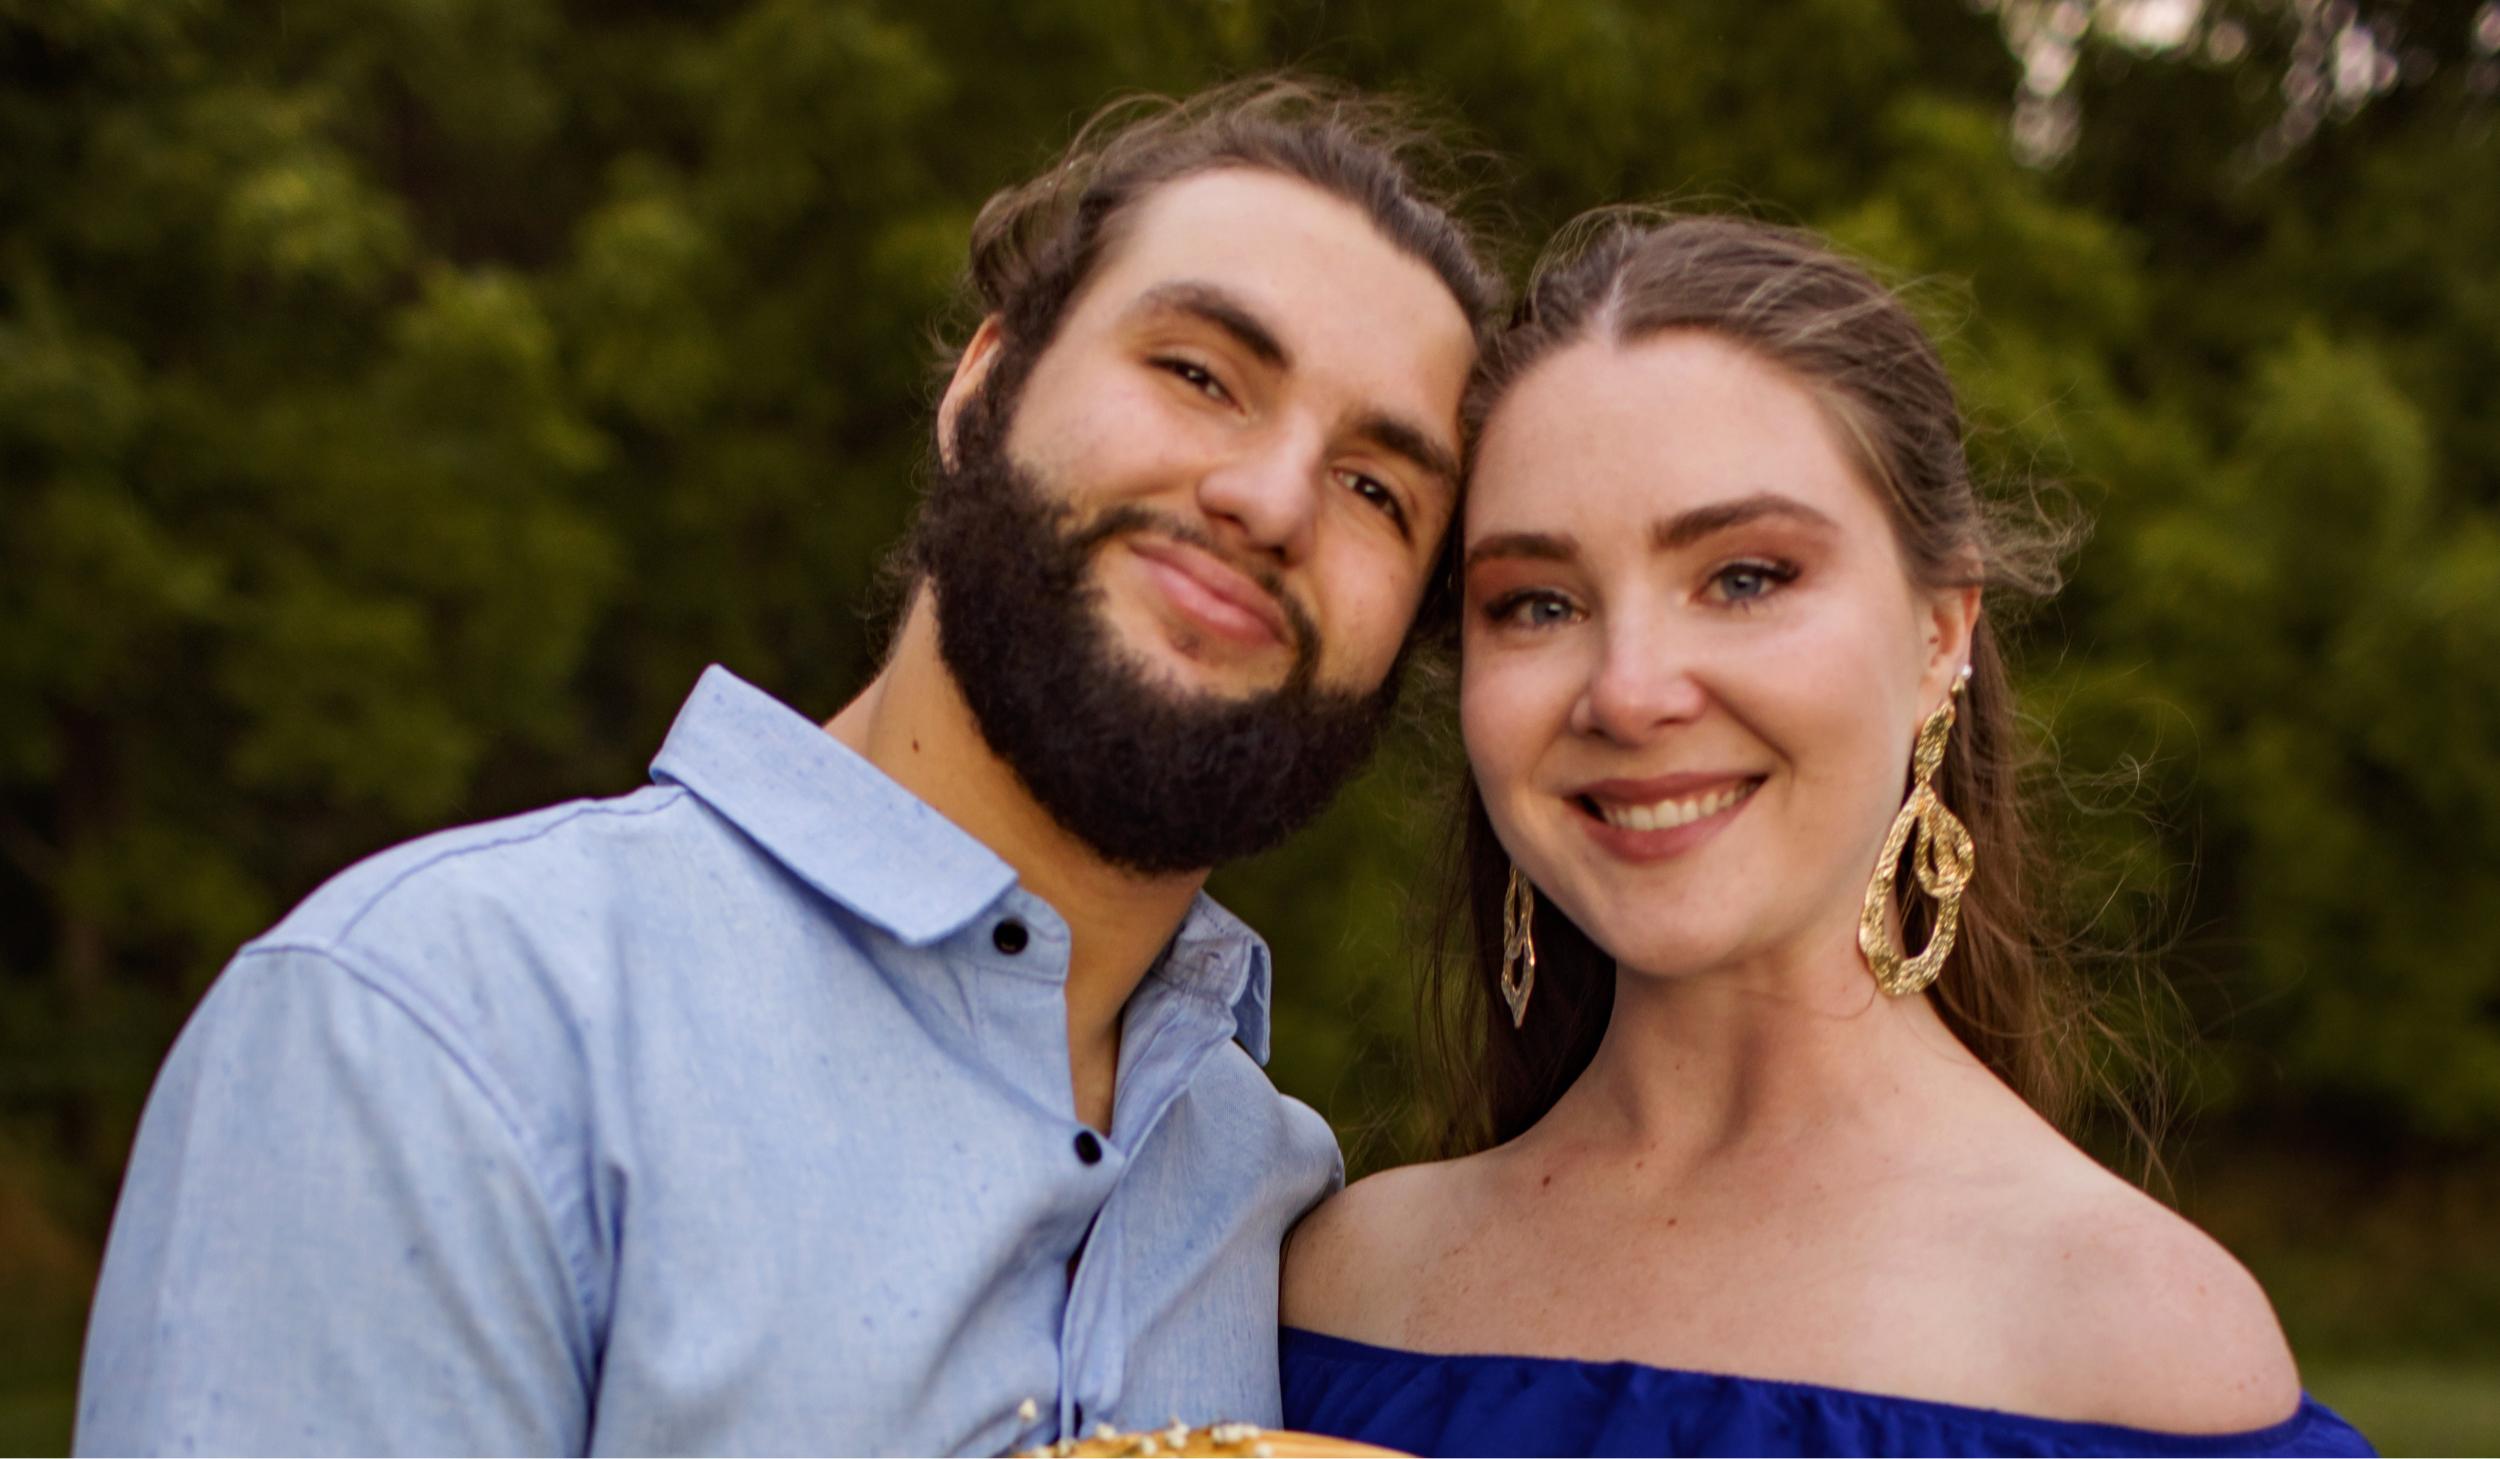 The Wedding Website of Brianna Kennedy and Chase Cochran